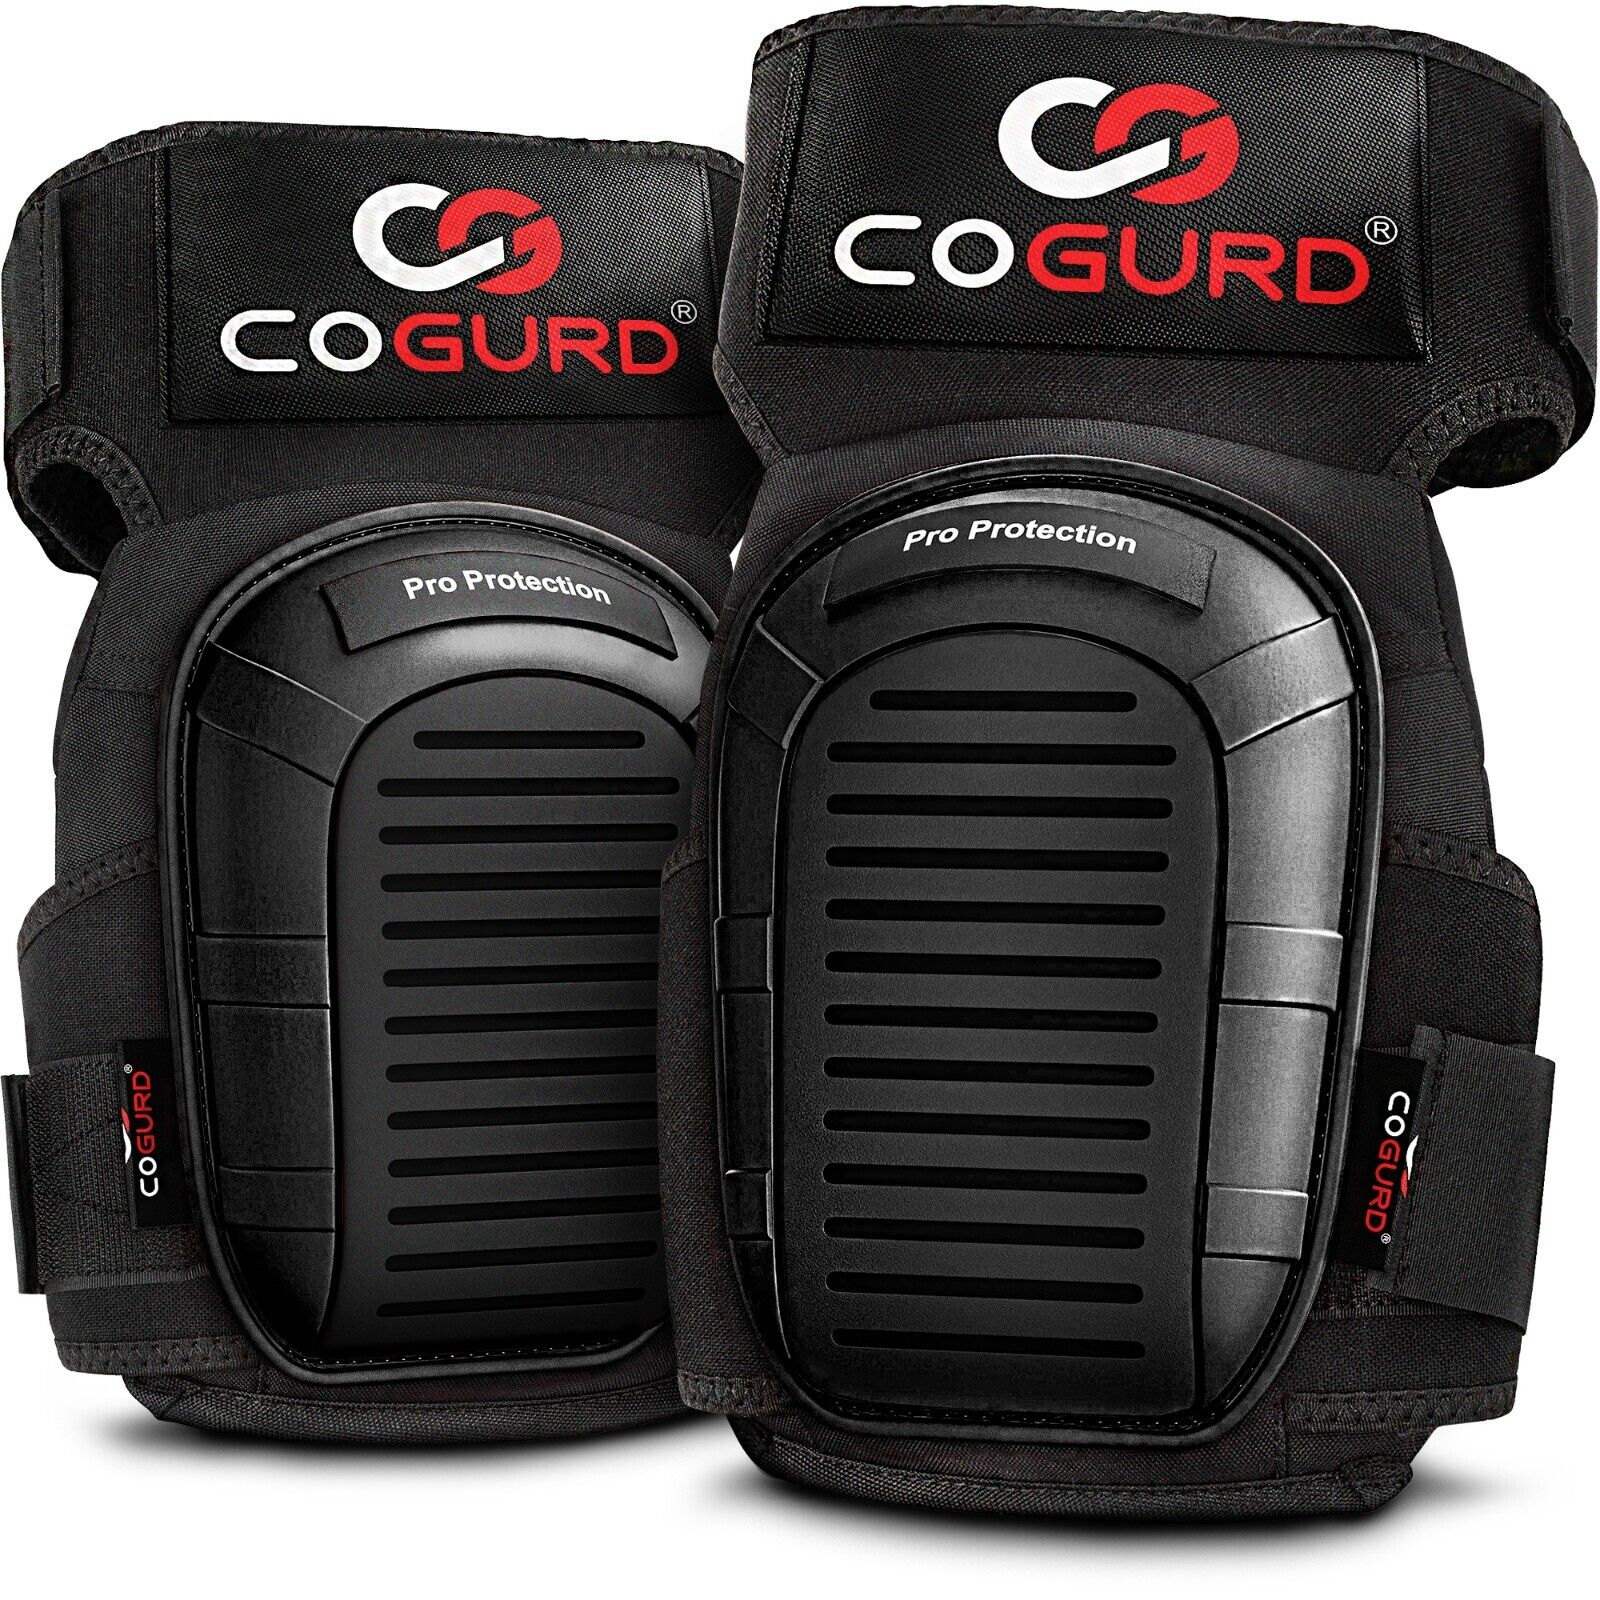 COGURD Knee Pads for Work Construction, Gardening, Cleaning, Flooring and Garage